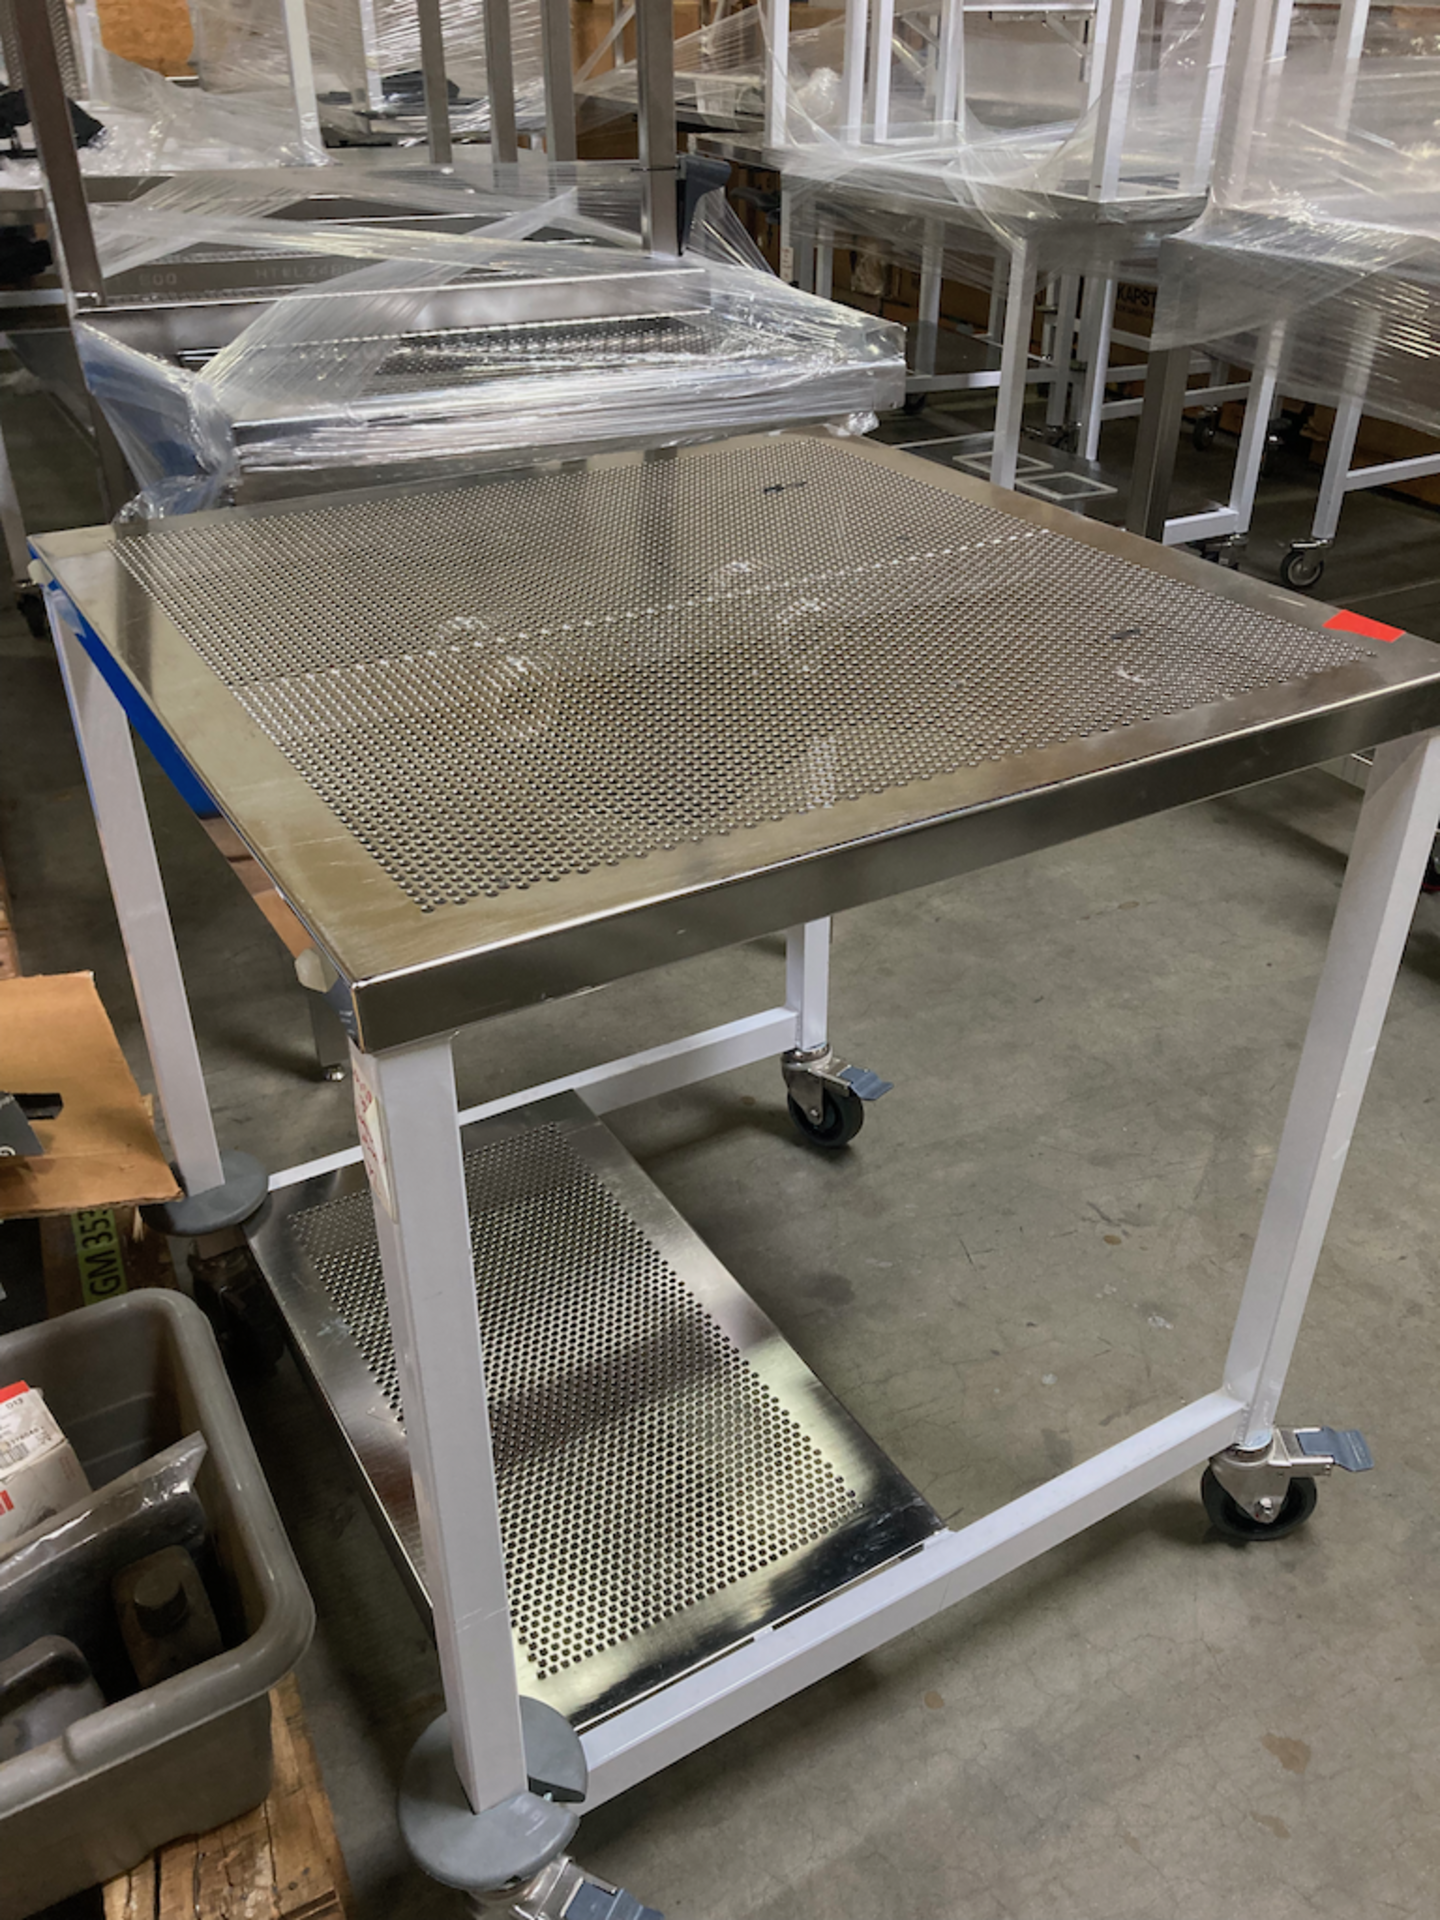 30 x 30 x 34 Perforated Stainless Steel Cleanroom Table Wheels, Bottom Shelf - Image 2 of 2